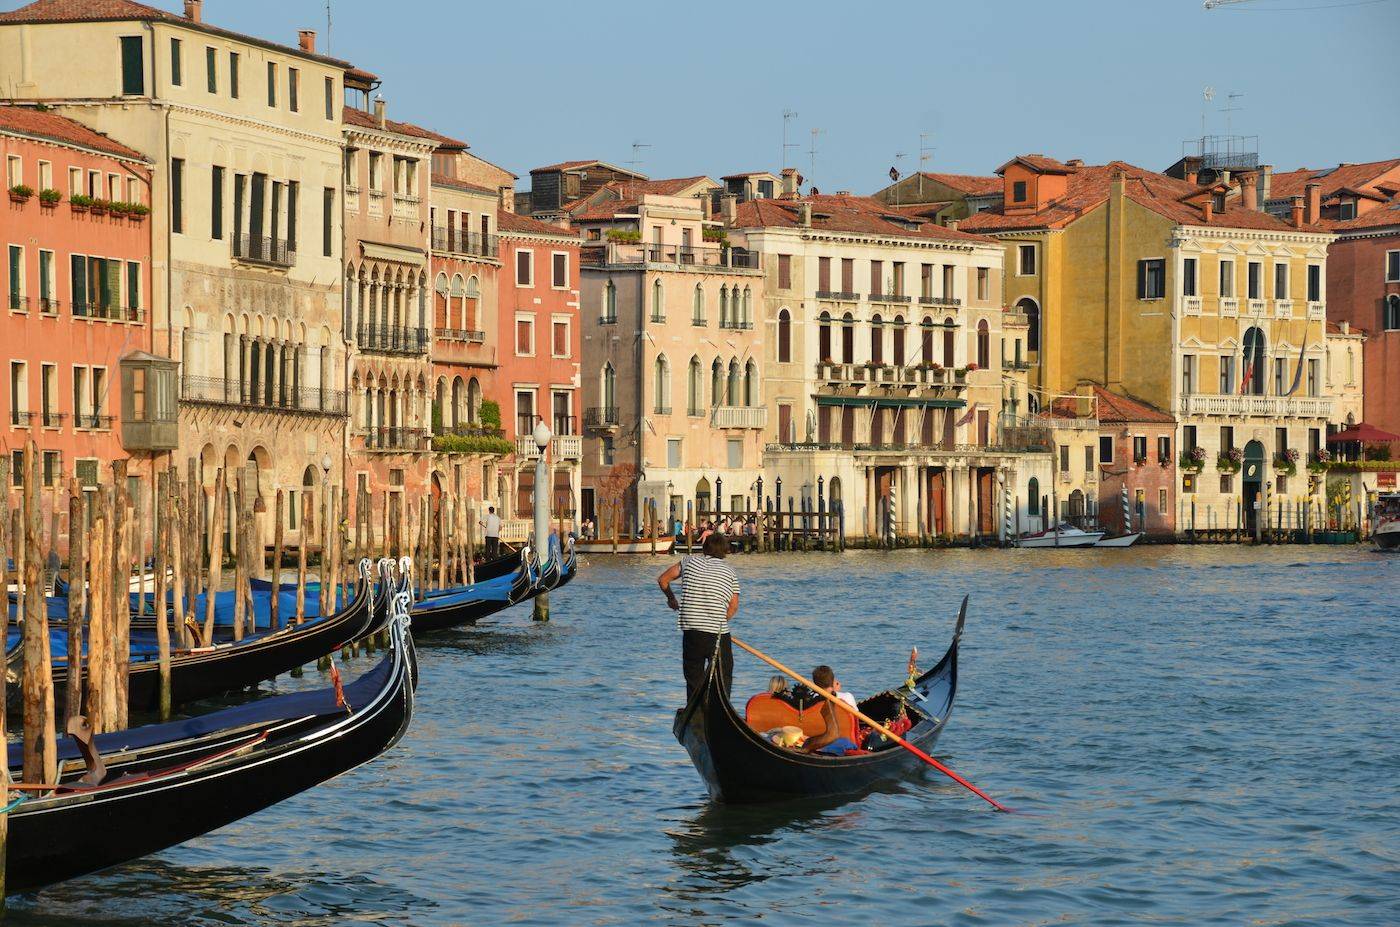 surroundings: the Grand Canal